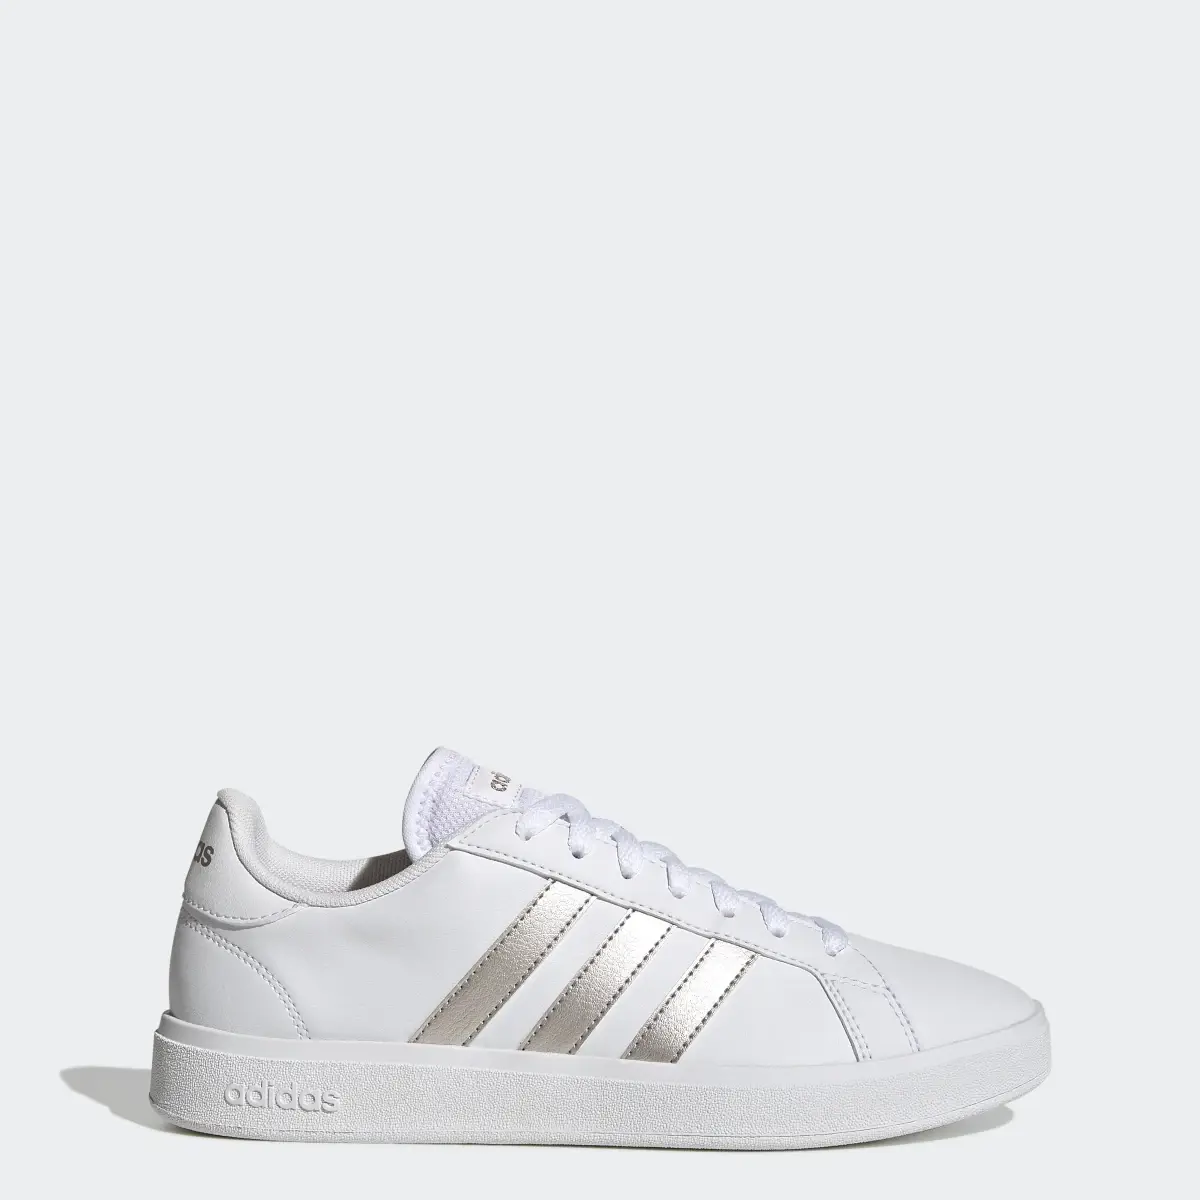 Adidas Tenis adidas Grand Court TD Lifestyle Court Casual. 1